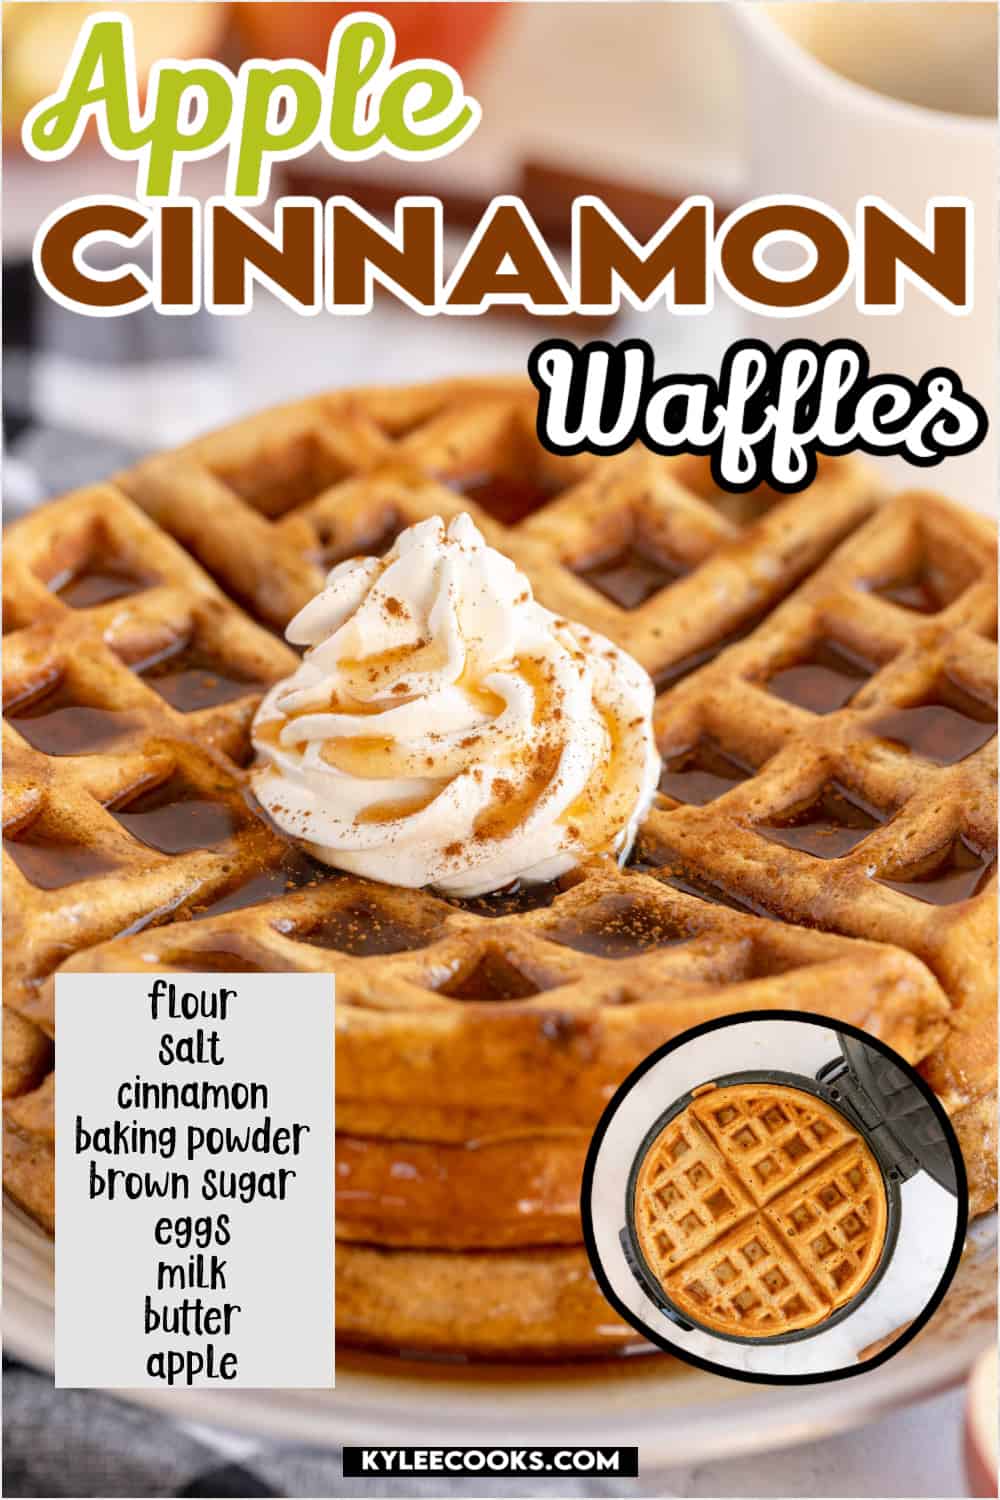 apple cinnamon waffle with whipped cream, syrup and with recipe name and ingredients overlaid in text.